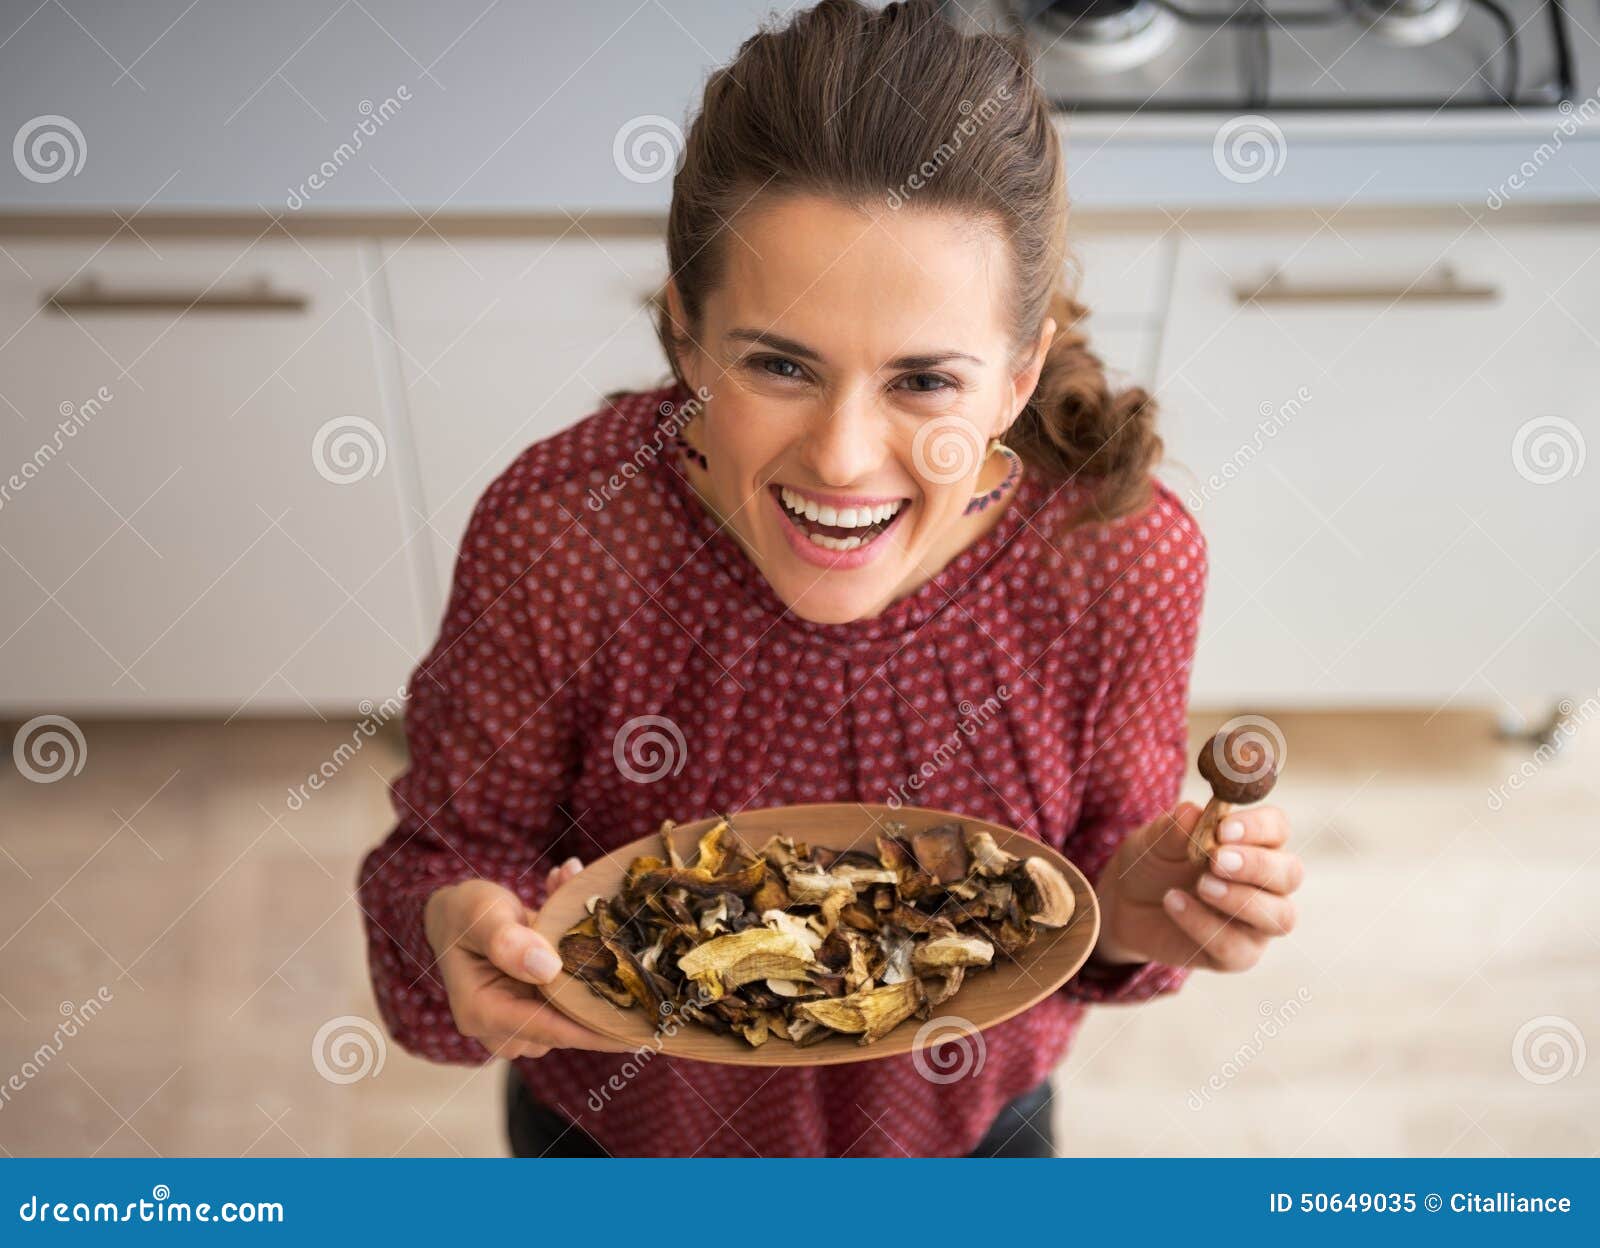 Young Housewife Showing Mushrooms Stoc pic